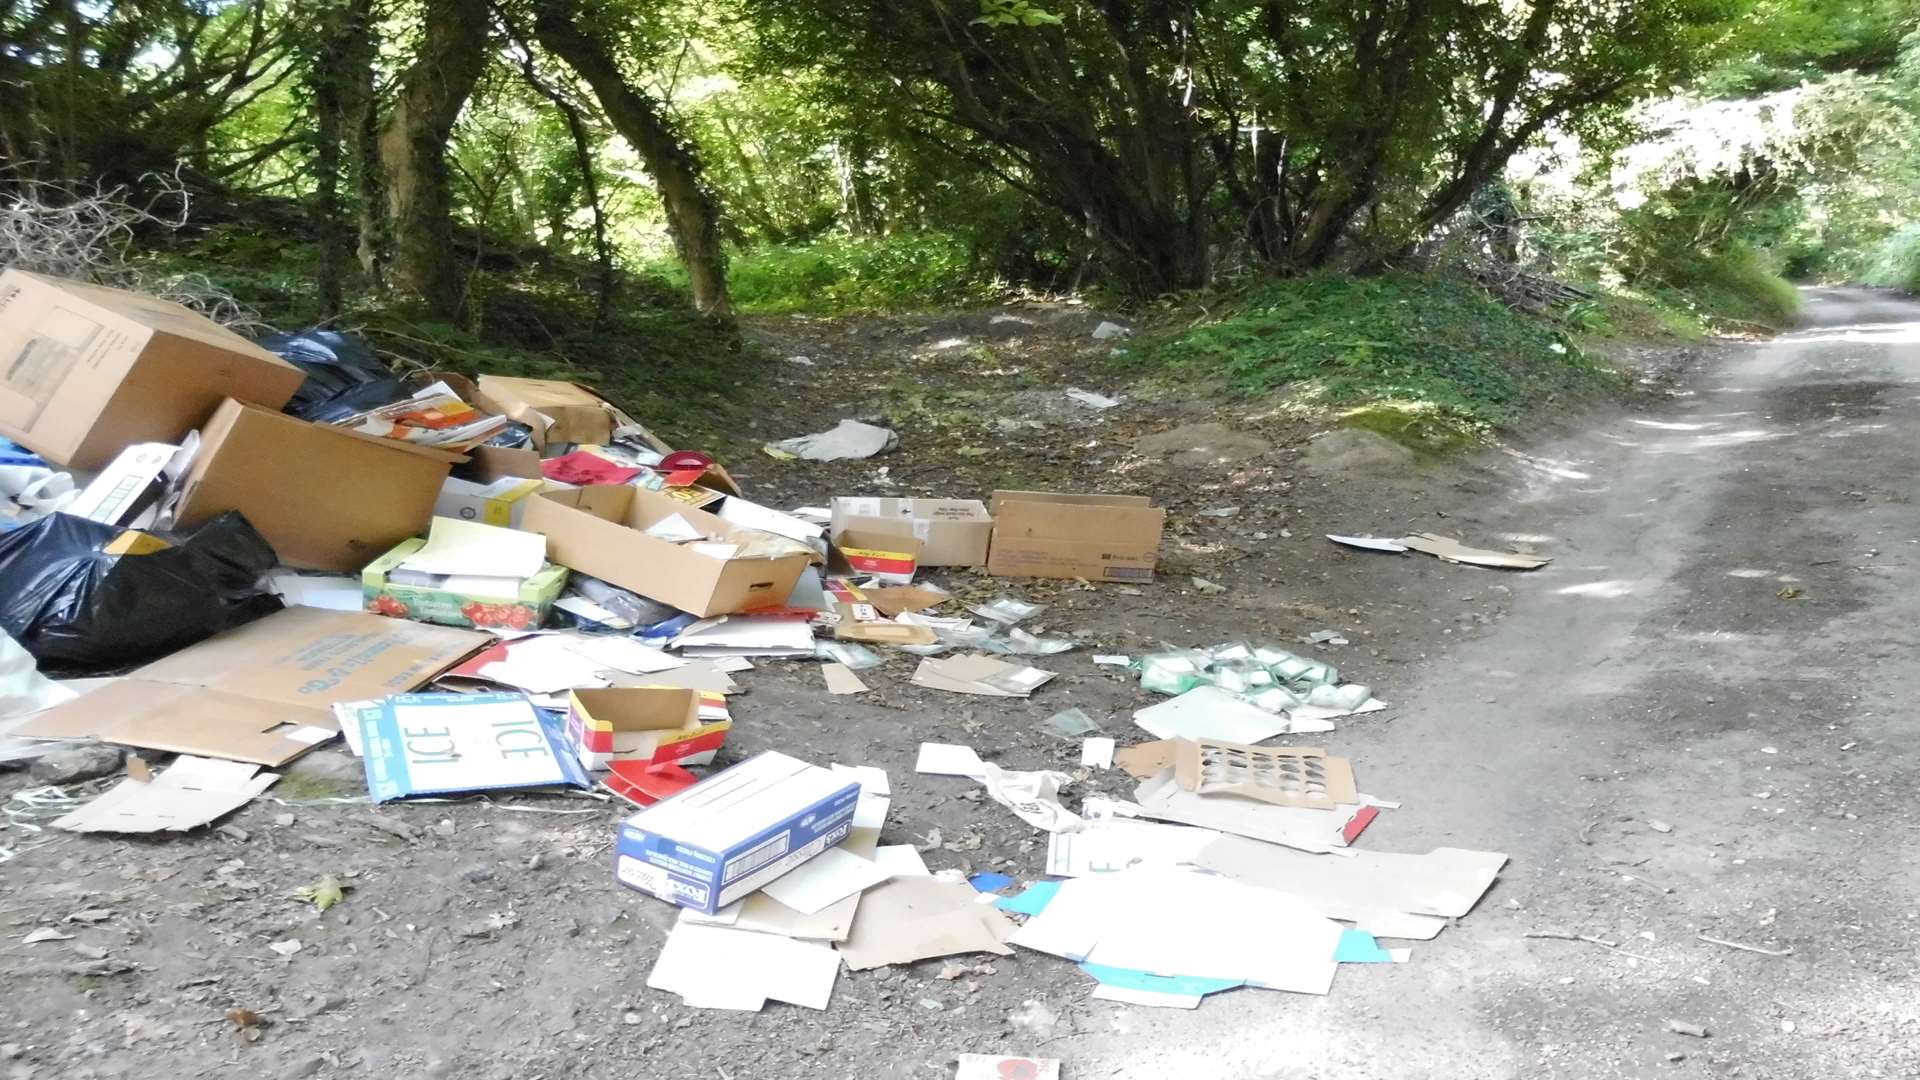 This act of fly-tipping in Crabble Lane in River was reported to Dover District Council on August 1, 2014